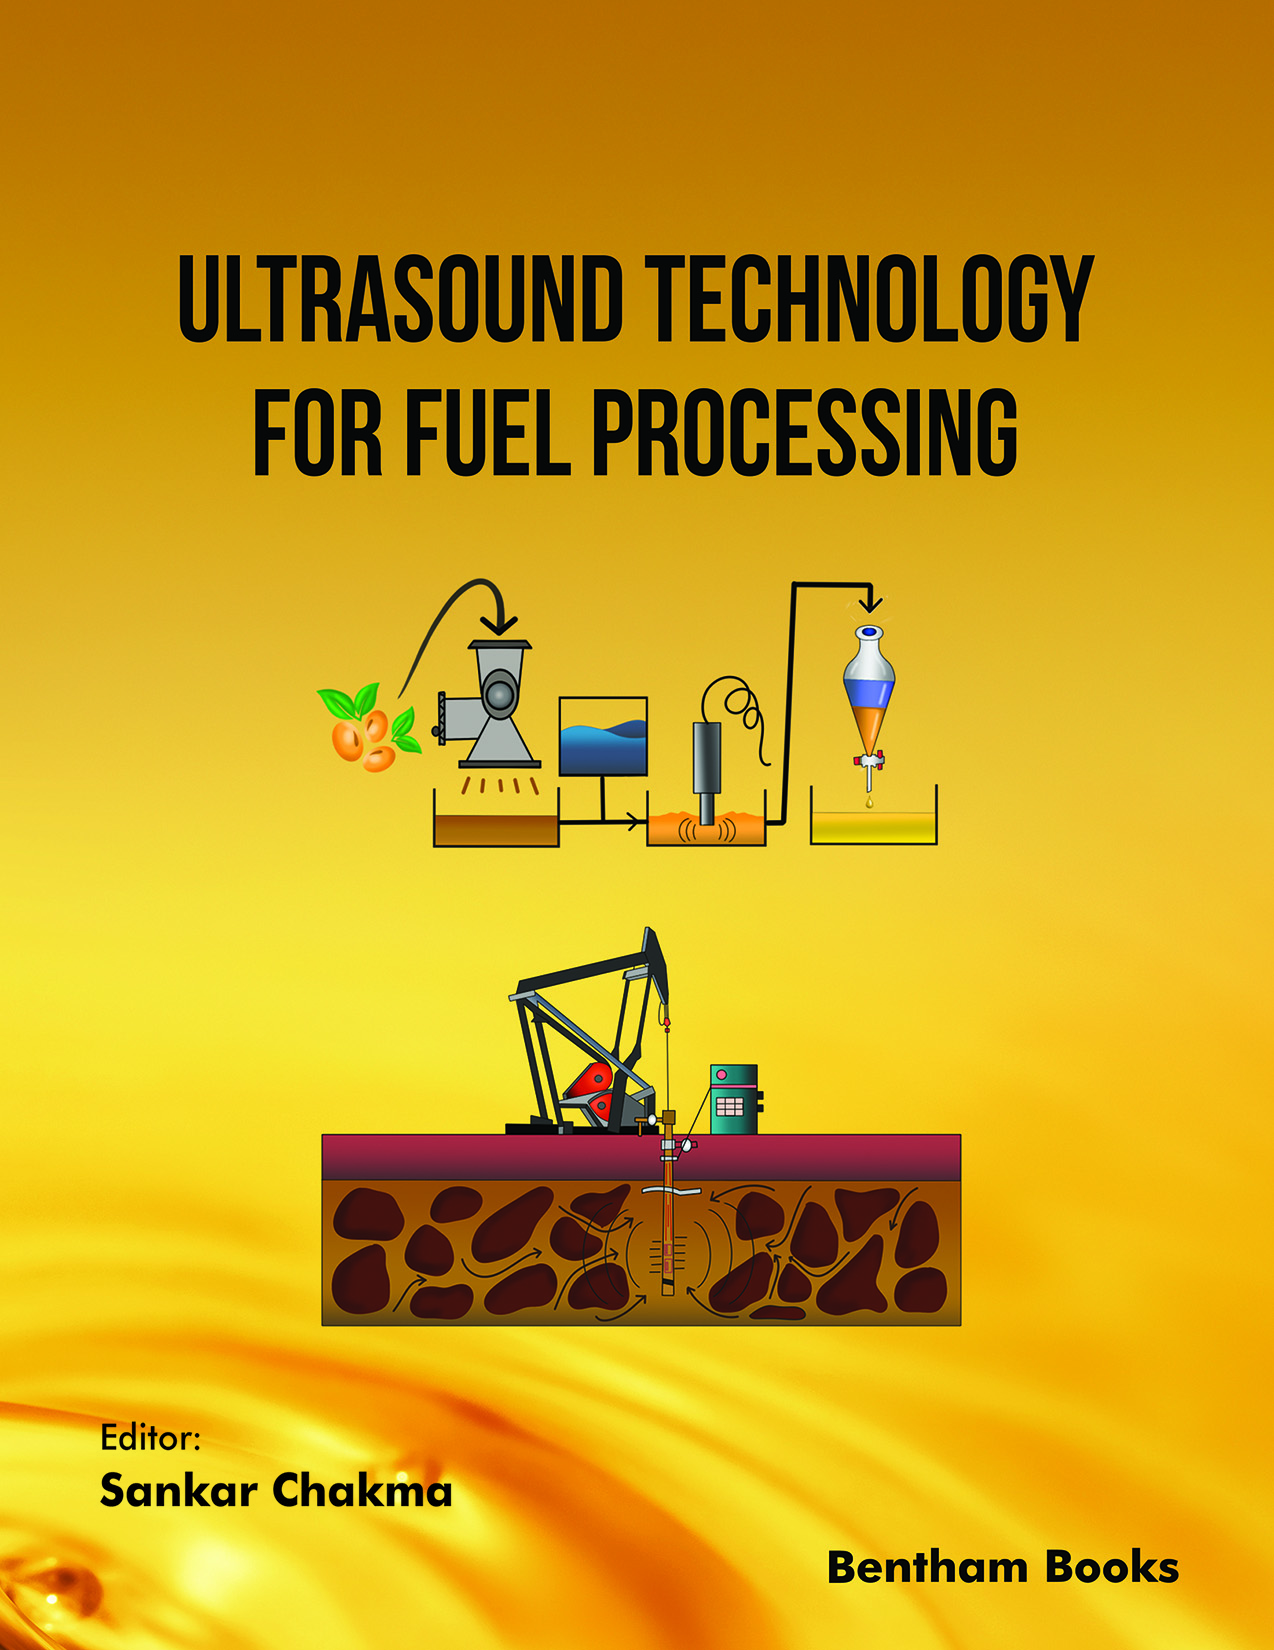 Ultrasound Technology for Fuel Processing